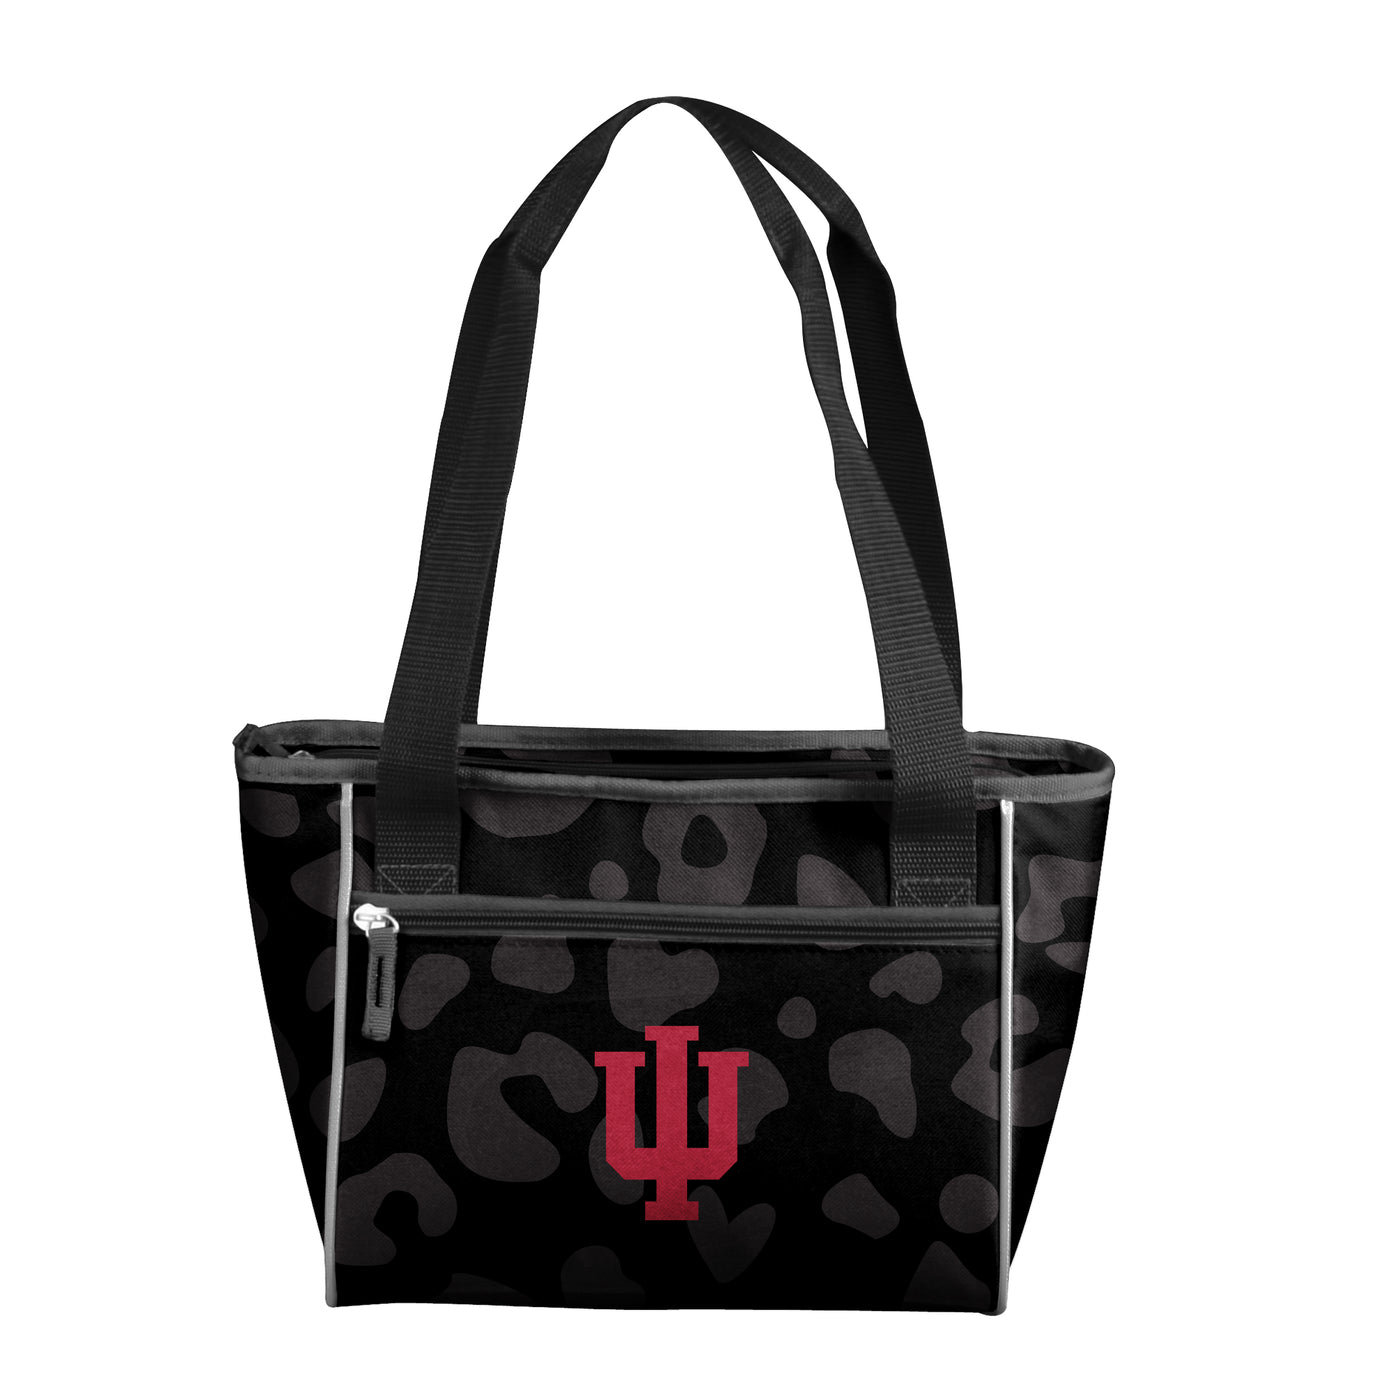 Indiana Leopard Print 16 Can Cooler Tote